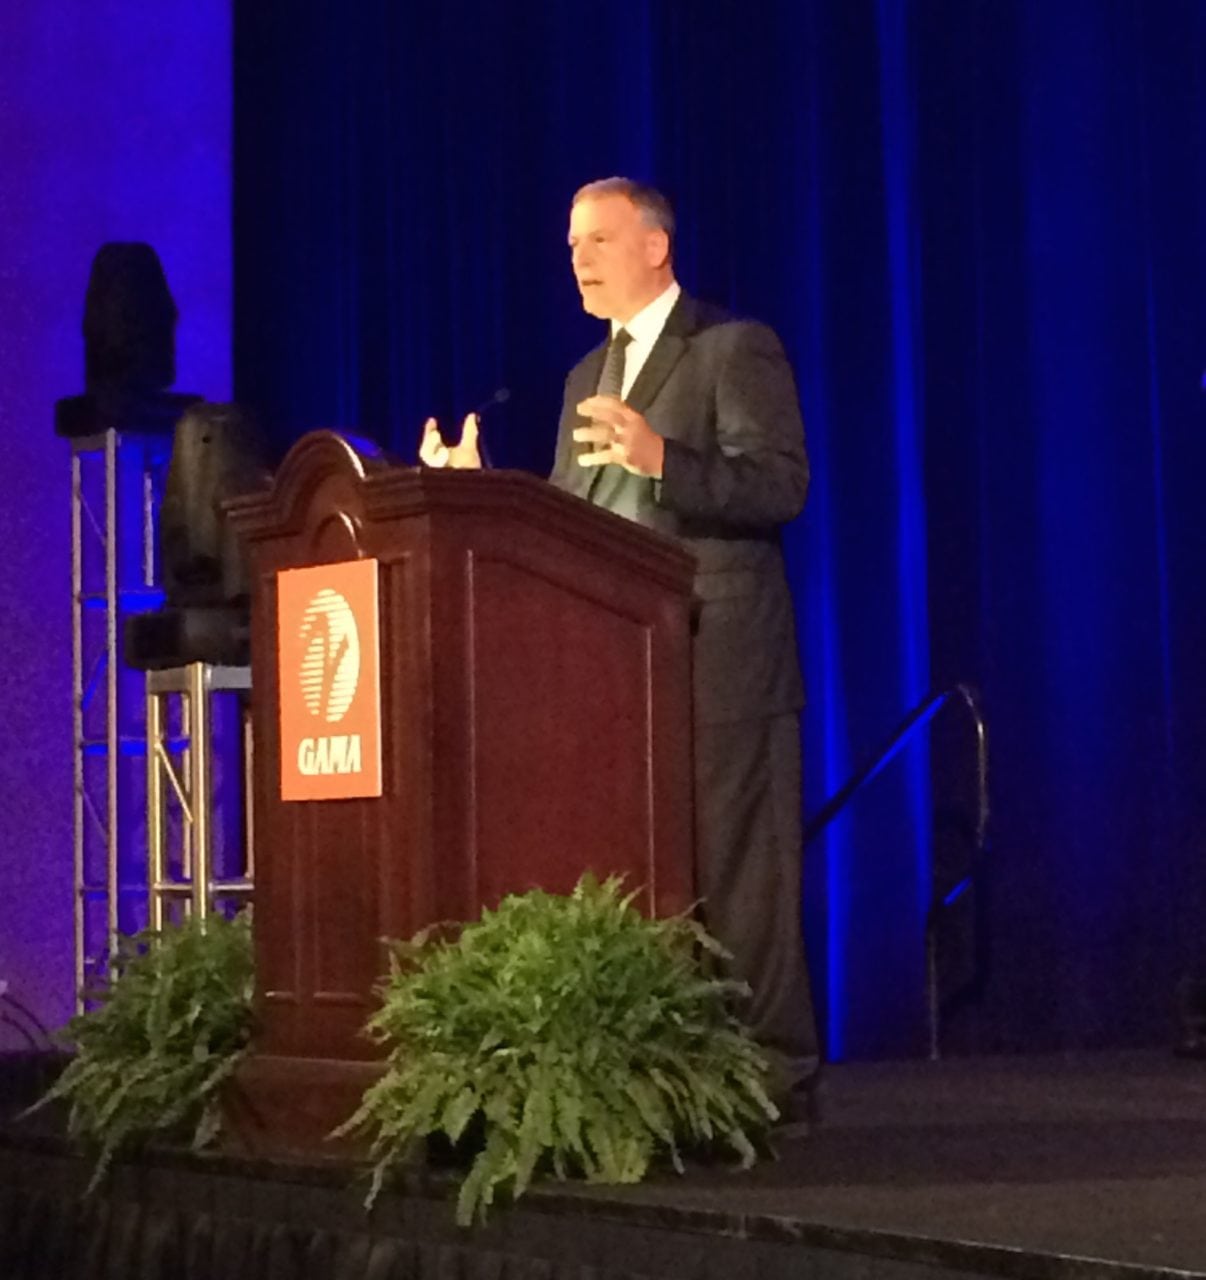 Pete Bunce speaking at the AEA industry show in Dallas, Texas on April 9